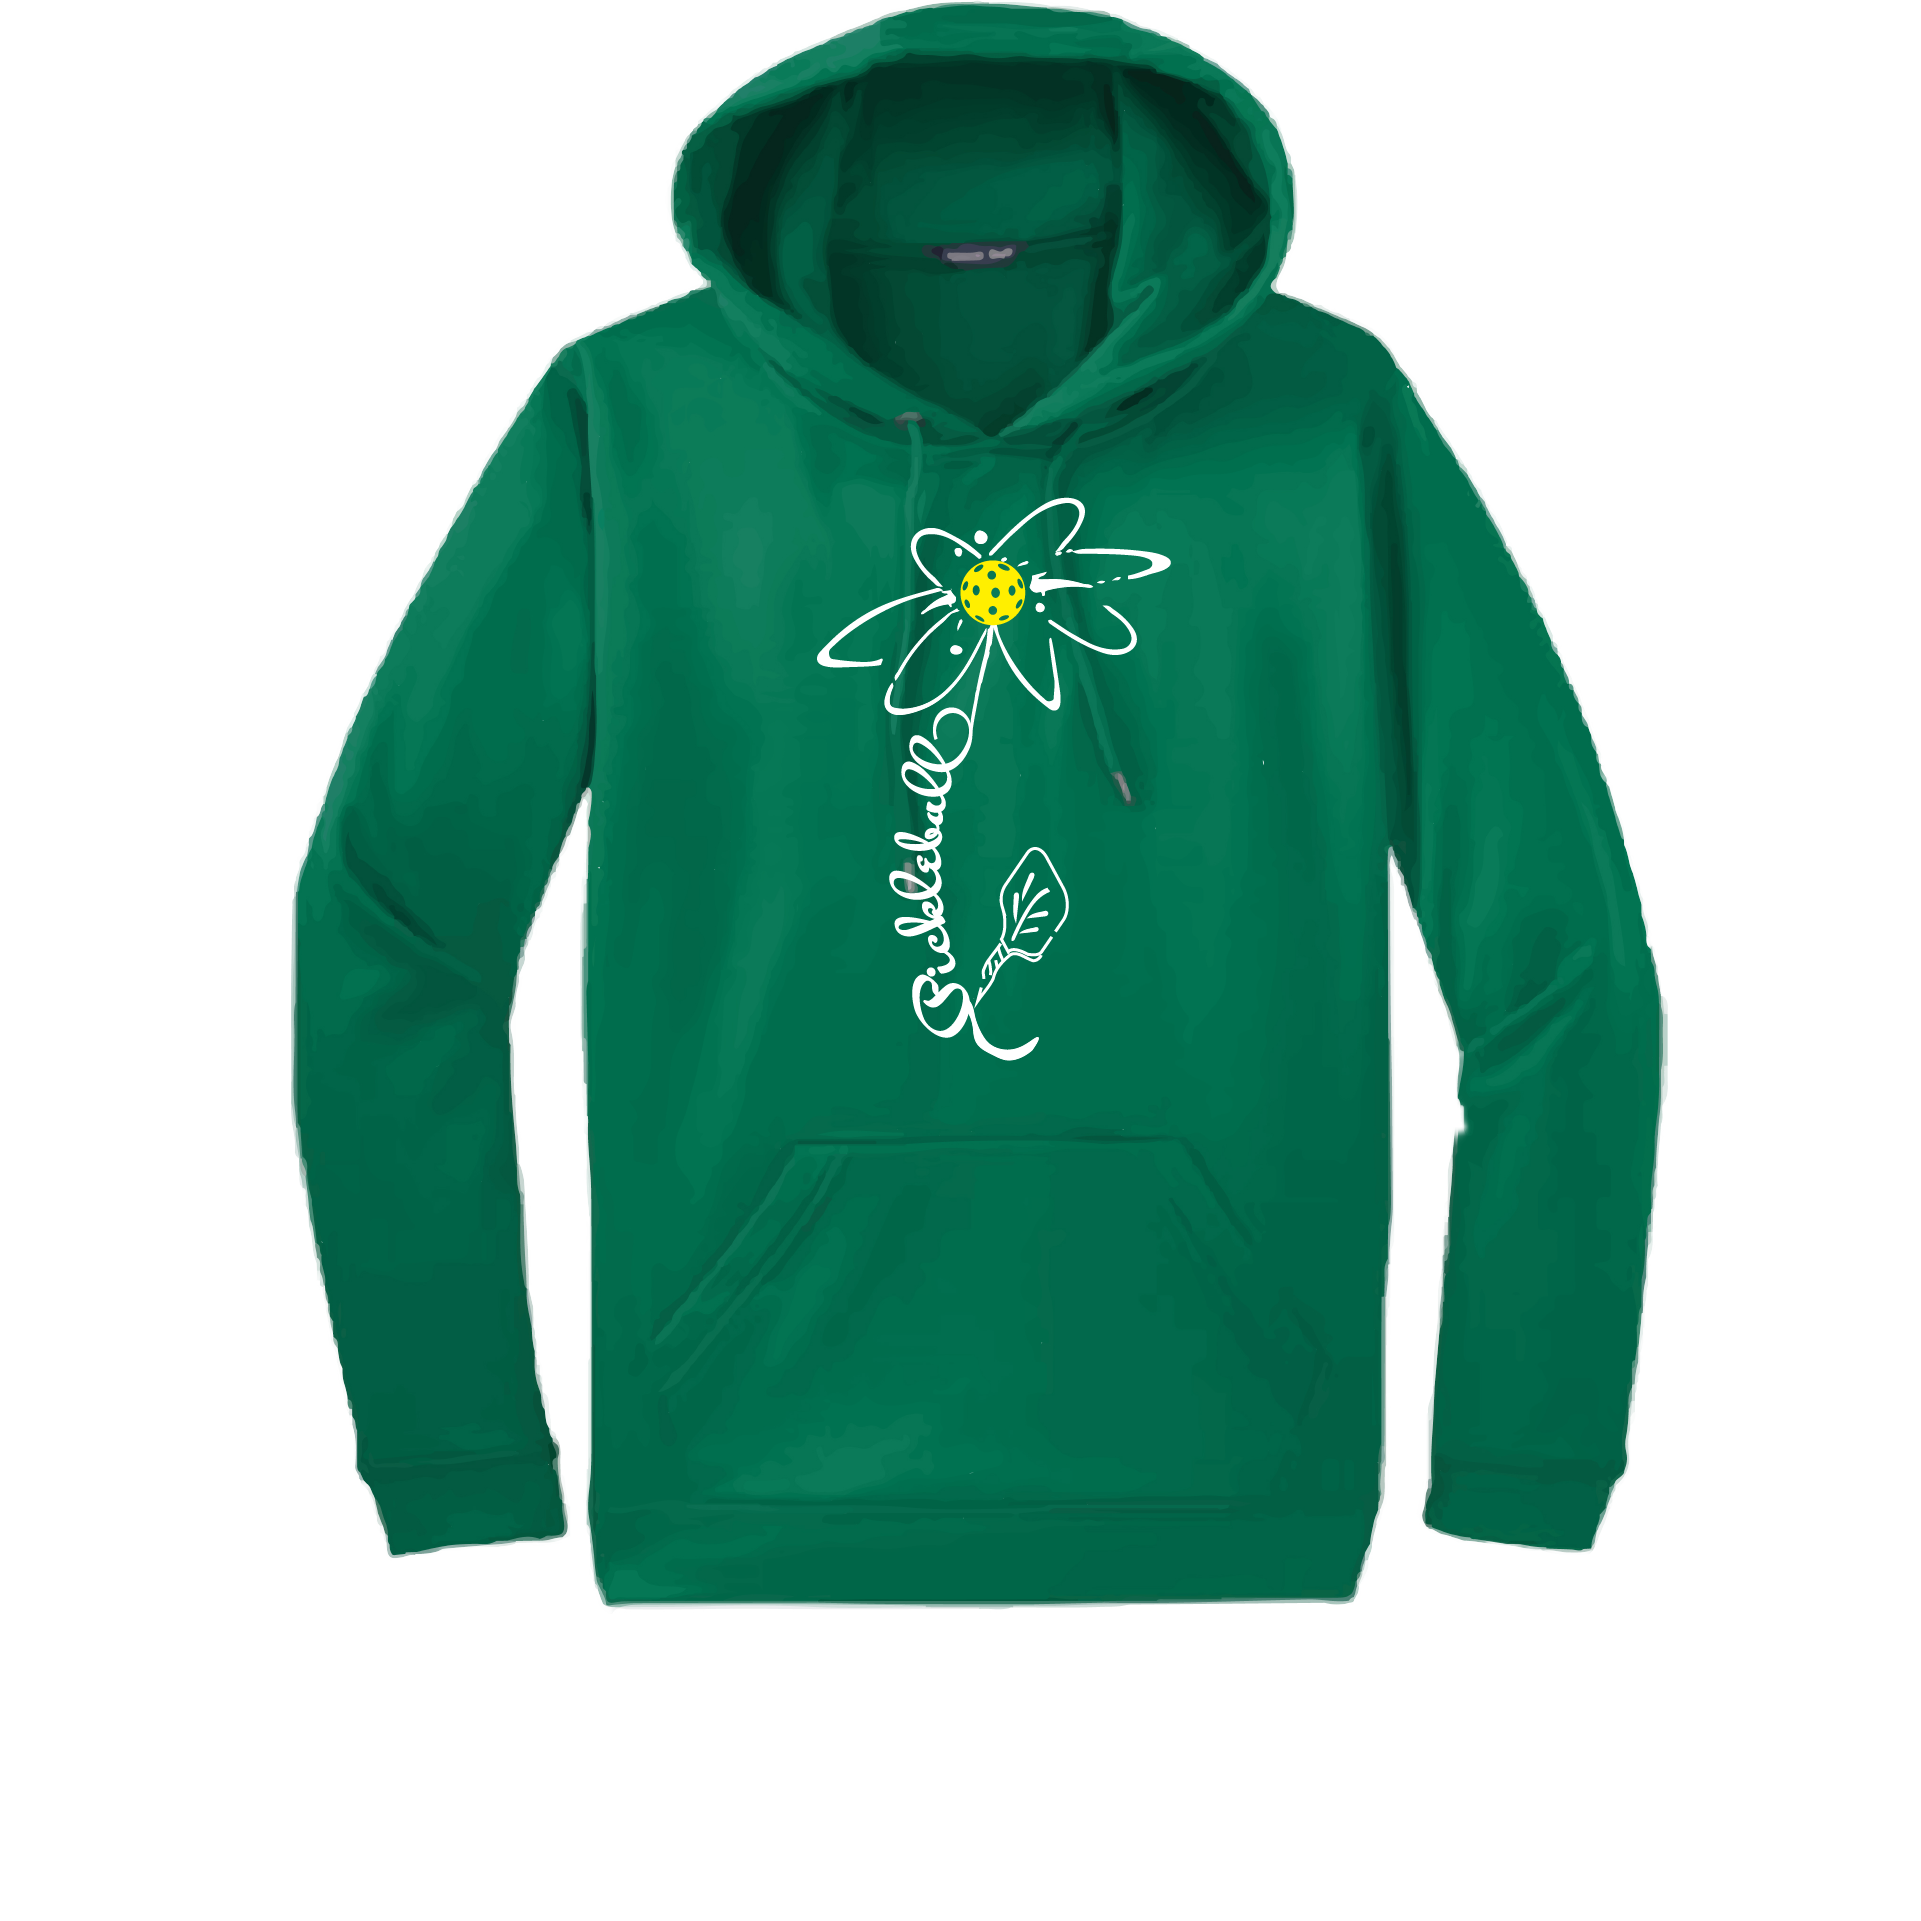 Pickleball Design: Pickleball Flower  Unisex Hooded Sweatshirt: Moisture-wicking, double-lined hood, front pouch pocket.  This unisex hooded sweatshirt is ultra comfortable and soft. Stay warm on the Pickleball courts while being that hit with this one of kind design.